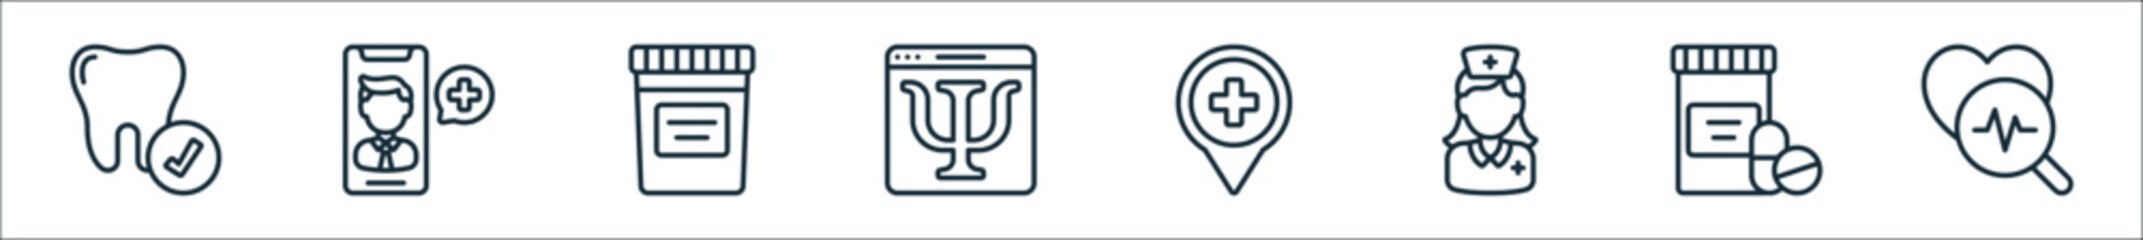 outline set of health checkup line icons. linear vector icons such as tooth, telemedicine, urine sample, psychology, location, nurse, pills, heart rate